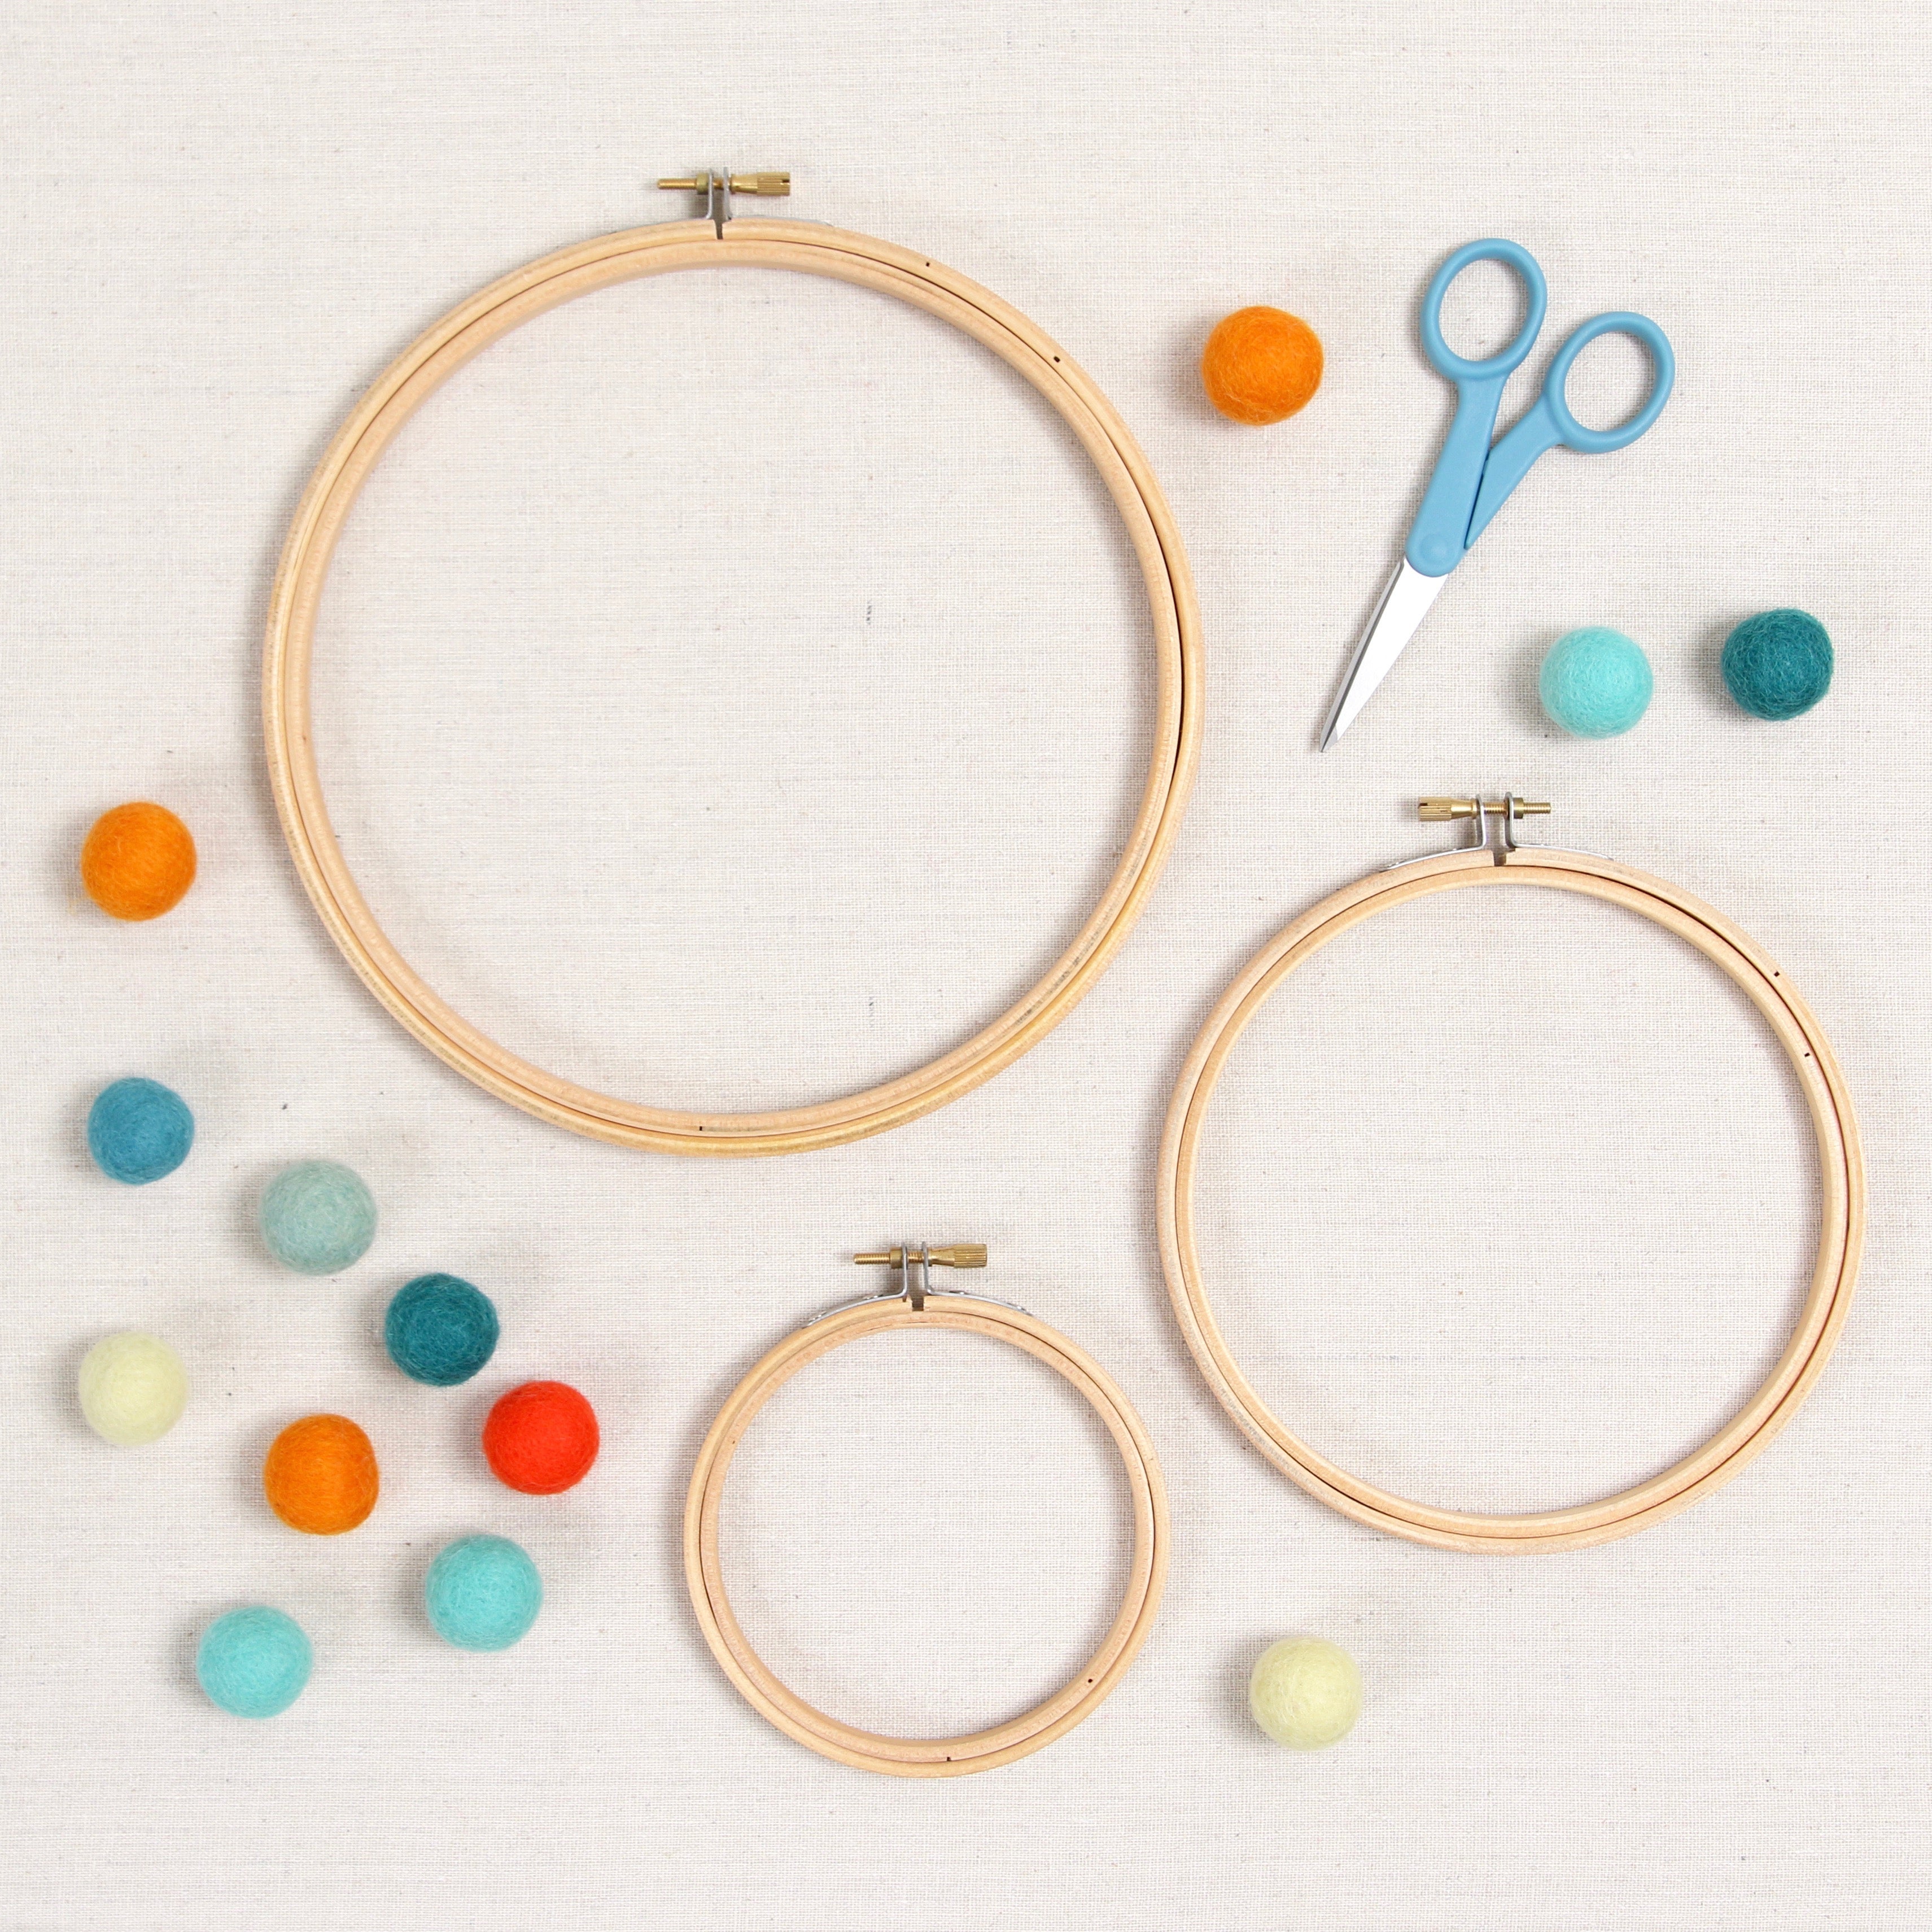 Hoops Party Decorations, Wooden Hoops Embroidery